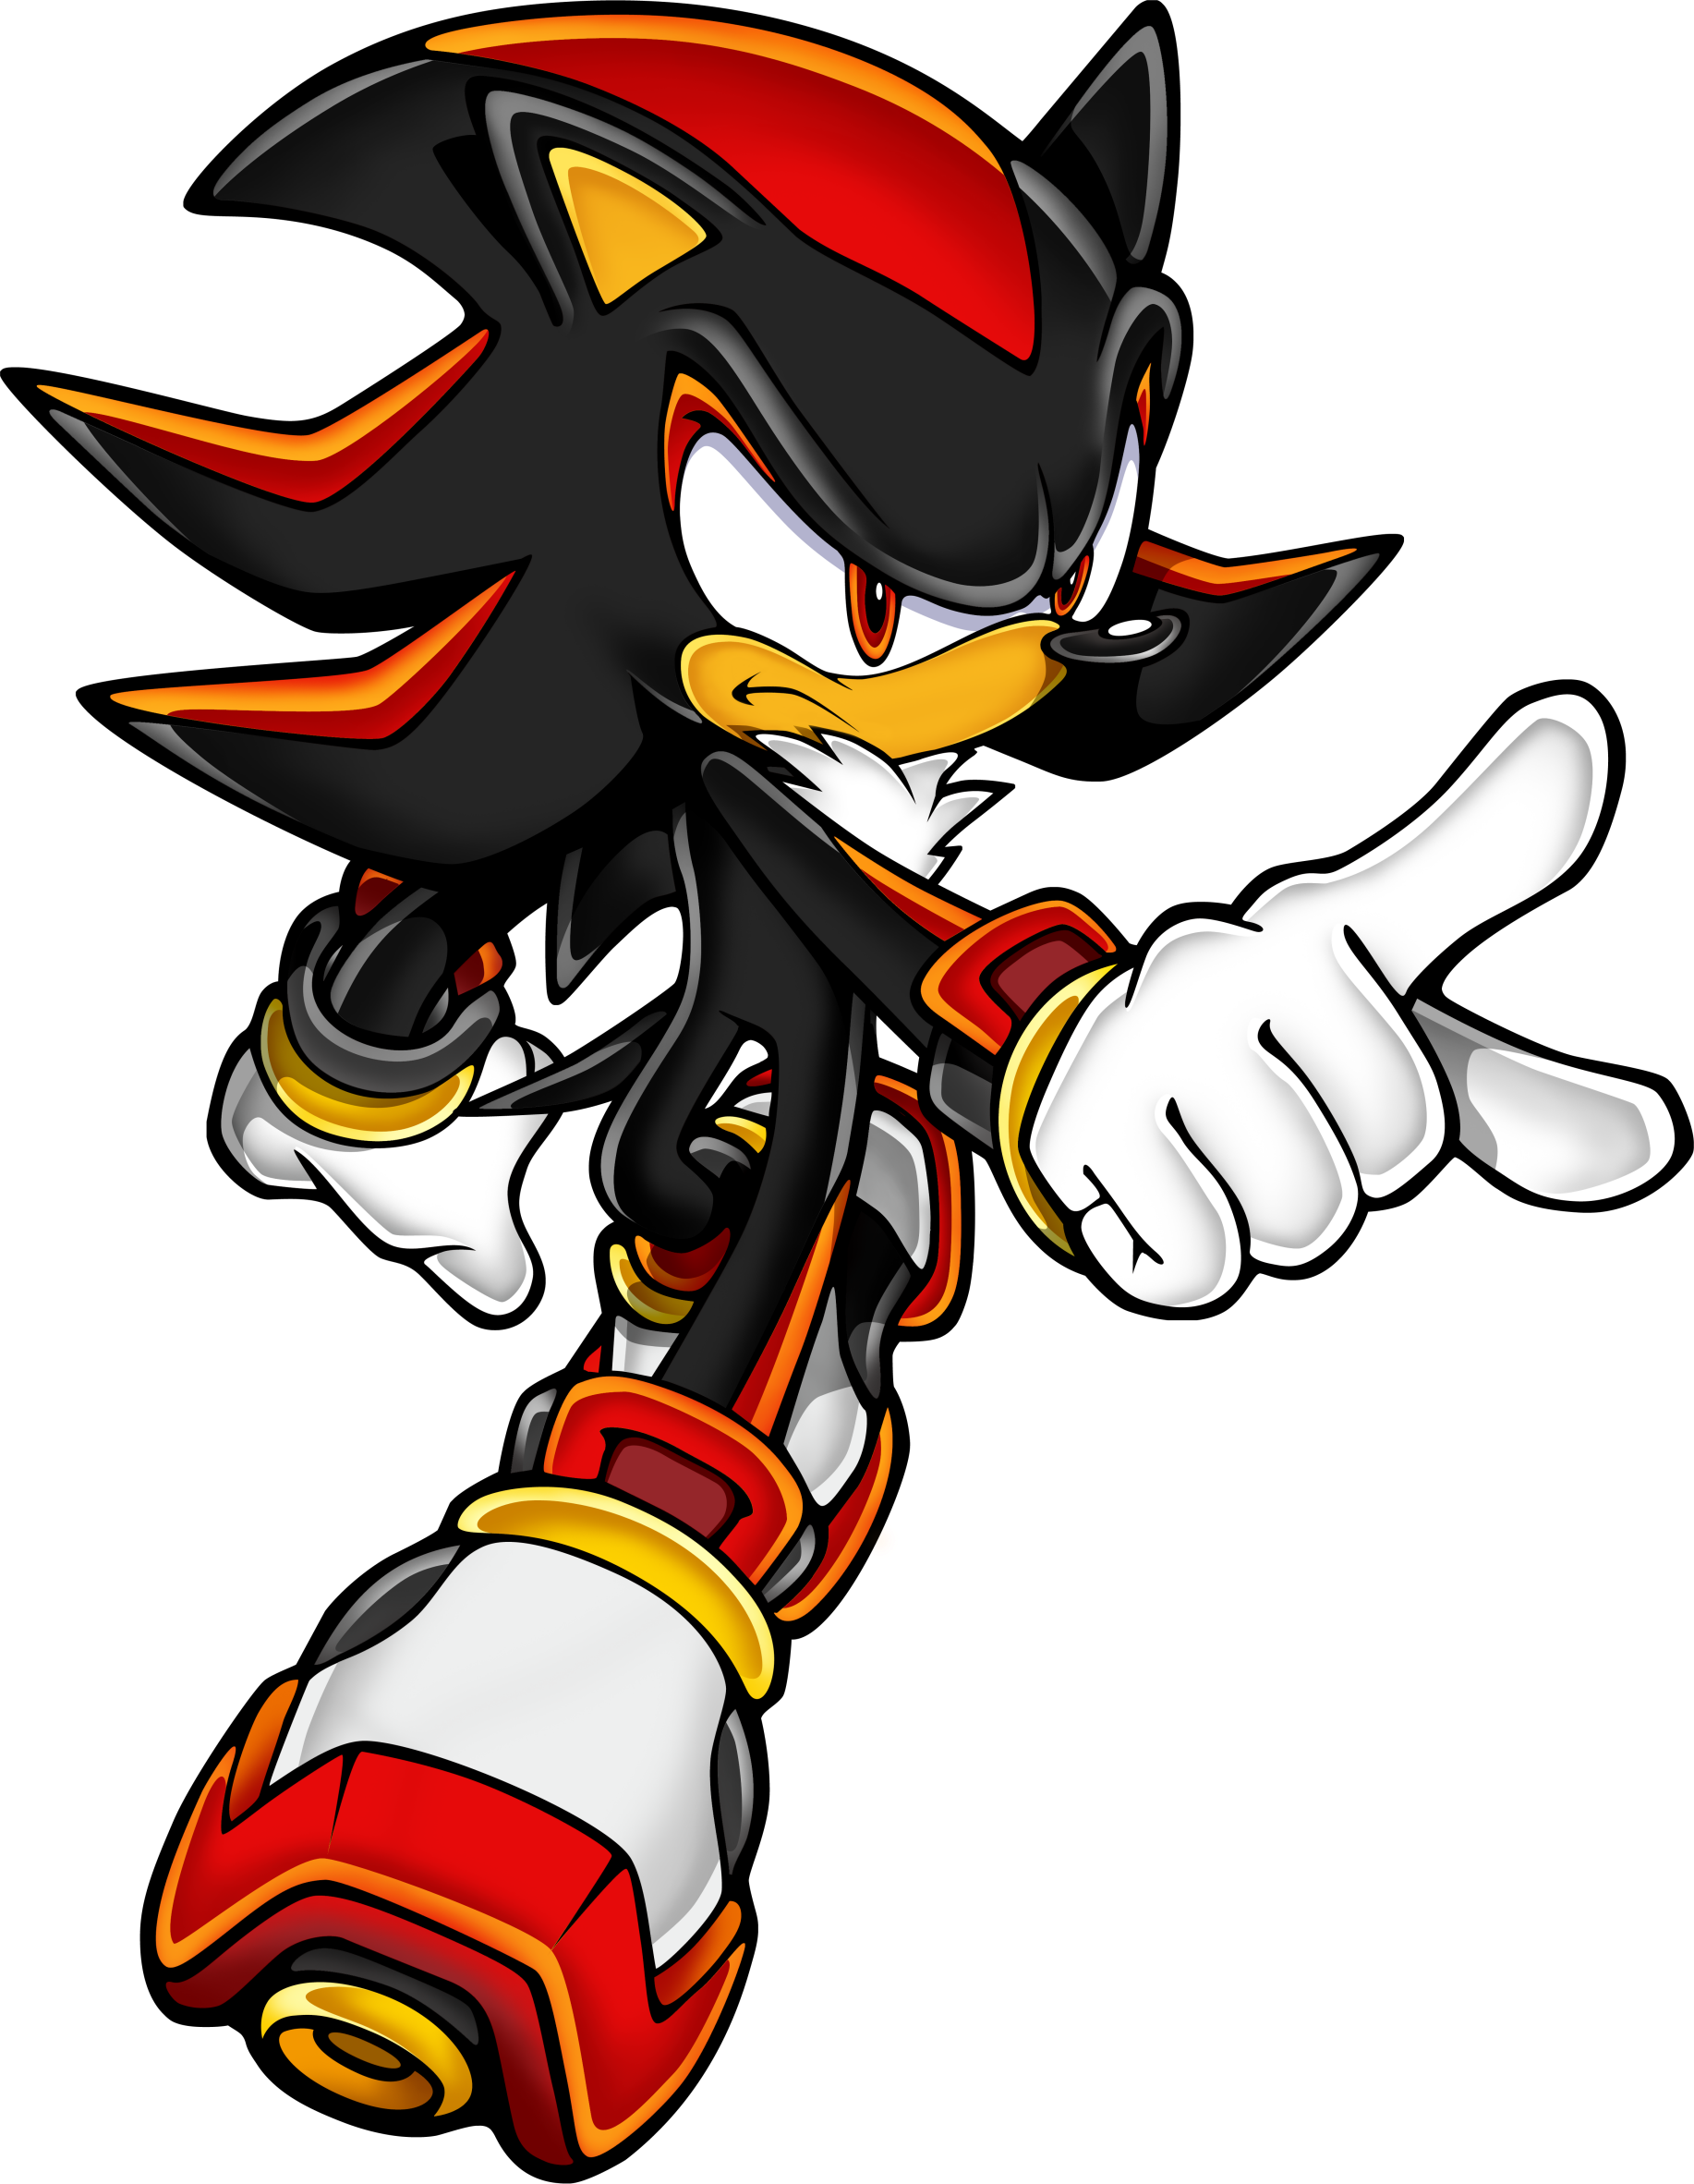 sonic-art-assets-dvd-shadow-the-hedgehog-gallery-sonic-scanf